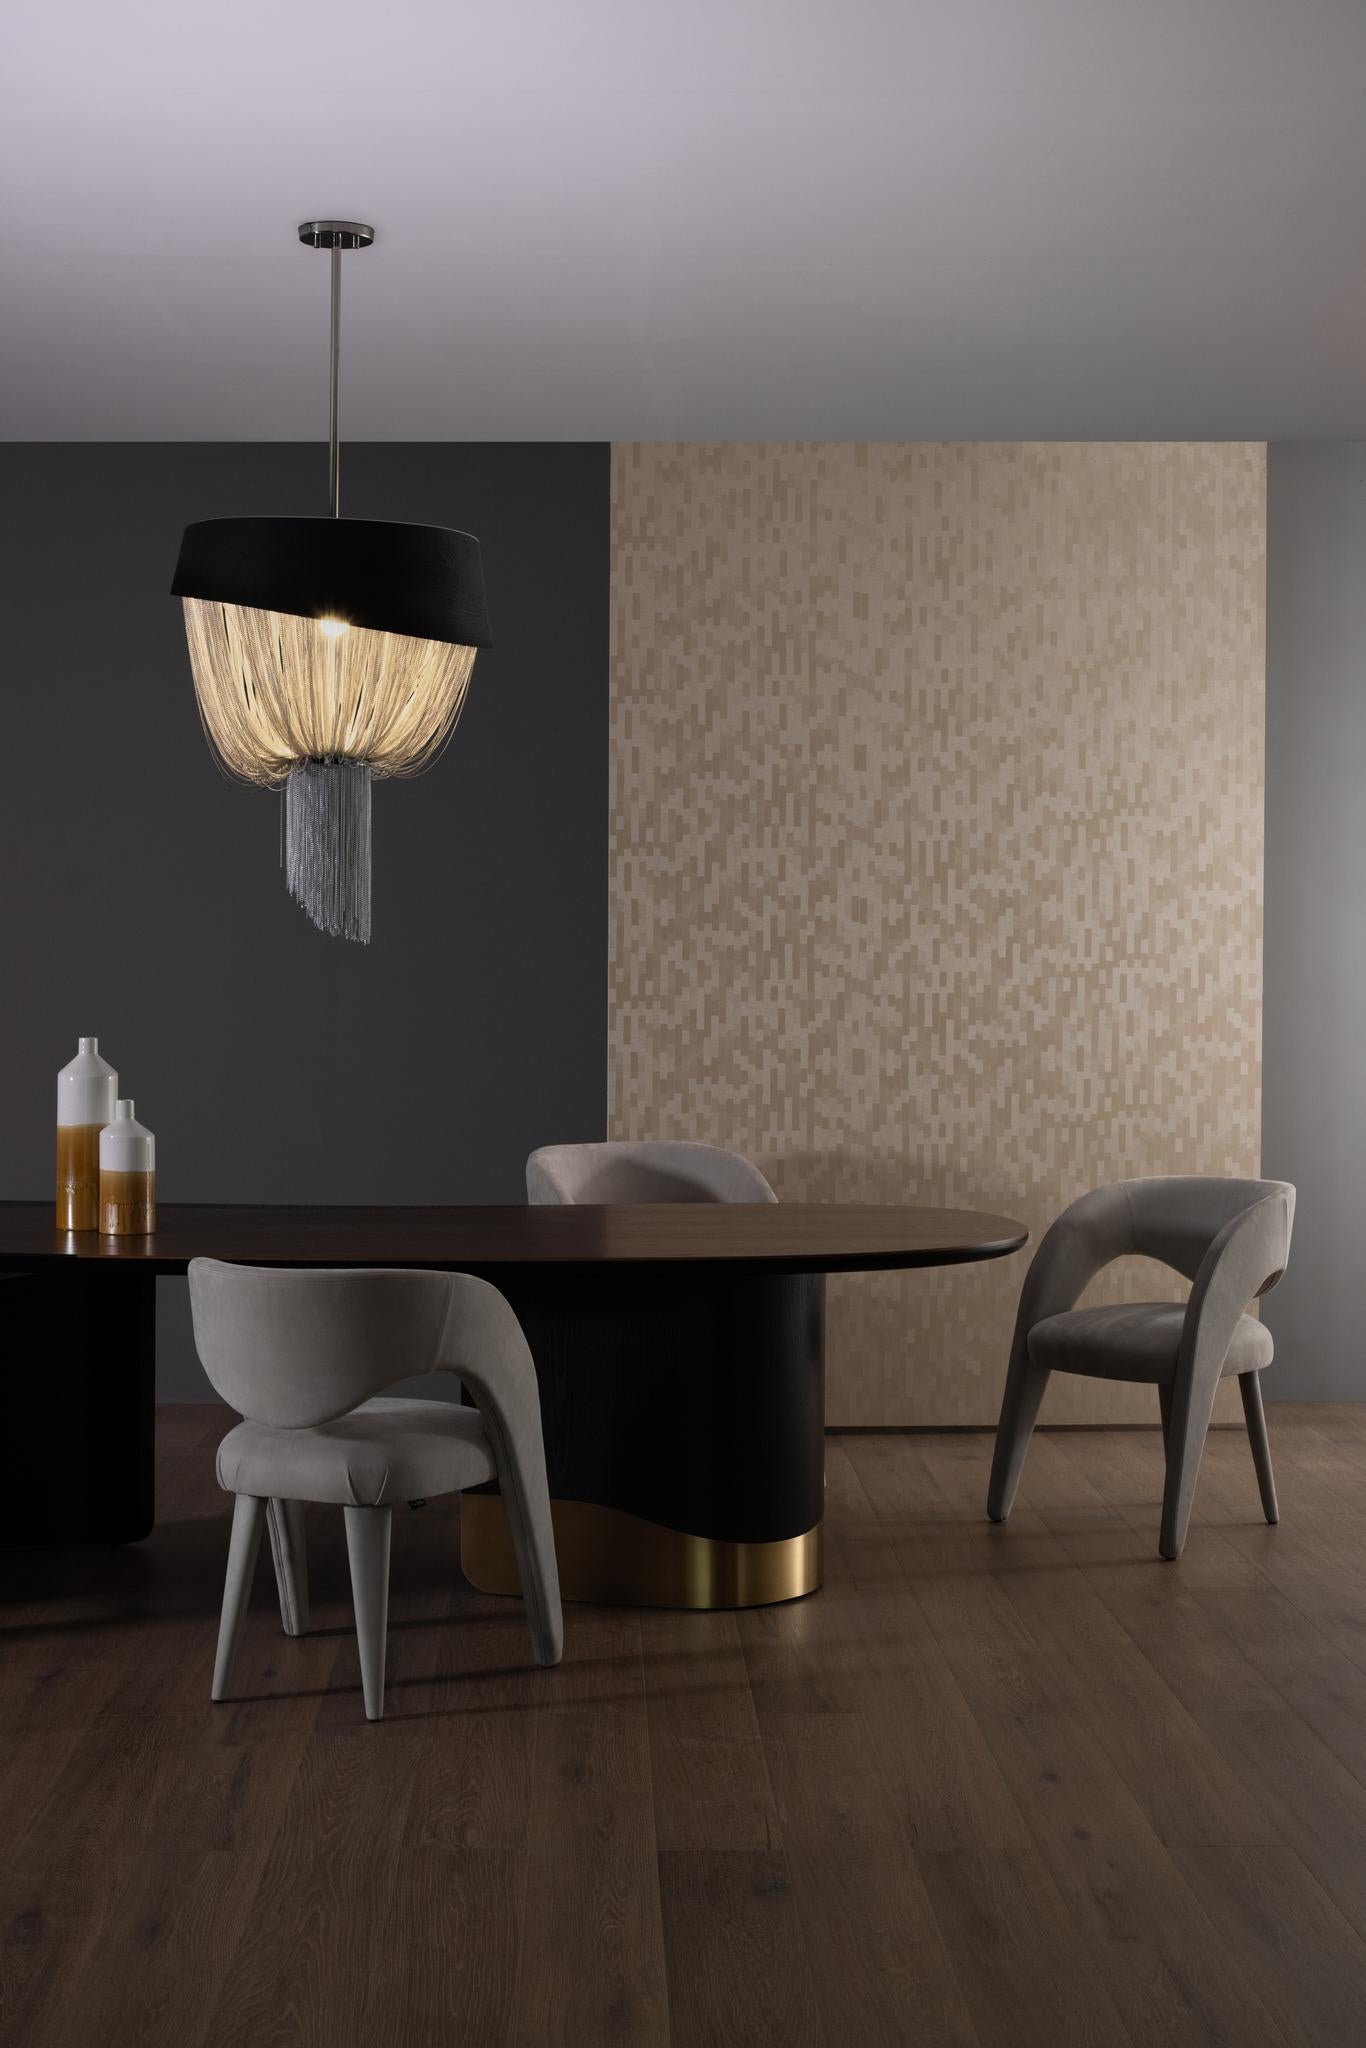 Forever Suspension Lamp, Contemporary Collection, Handcrafted in Portugal - Europe by Greenapple.

The Forever modern chandelier is inspired by the art of jewellery, setting the pace with its captivating design. Serving as a modern interpretation of